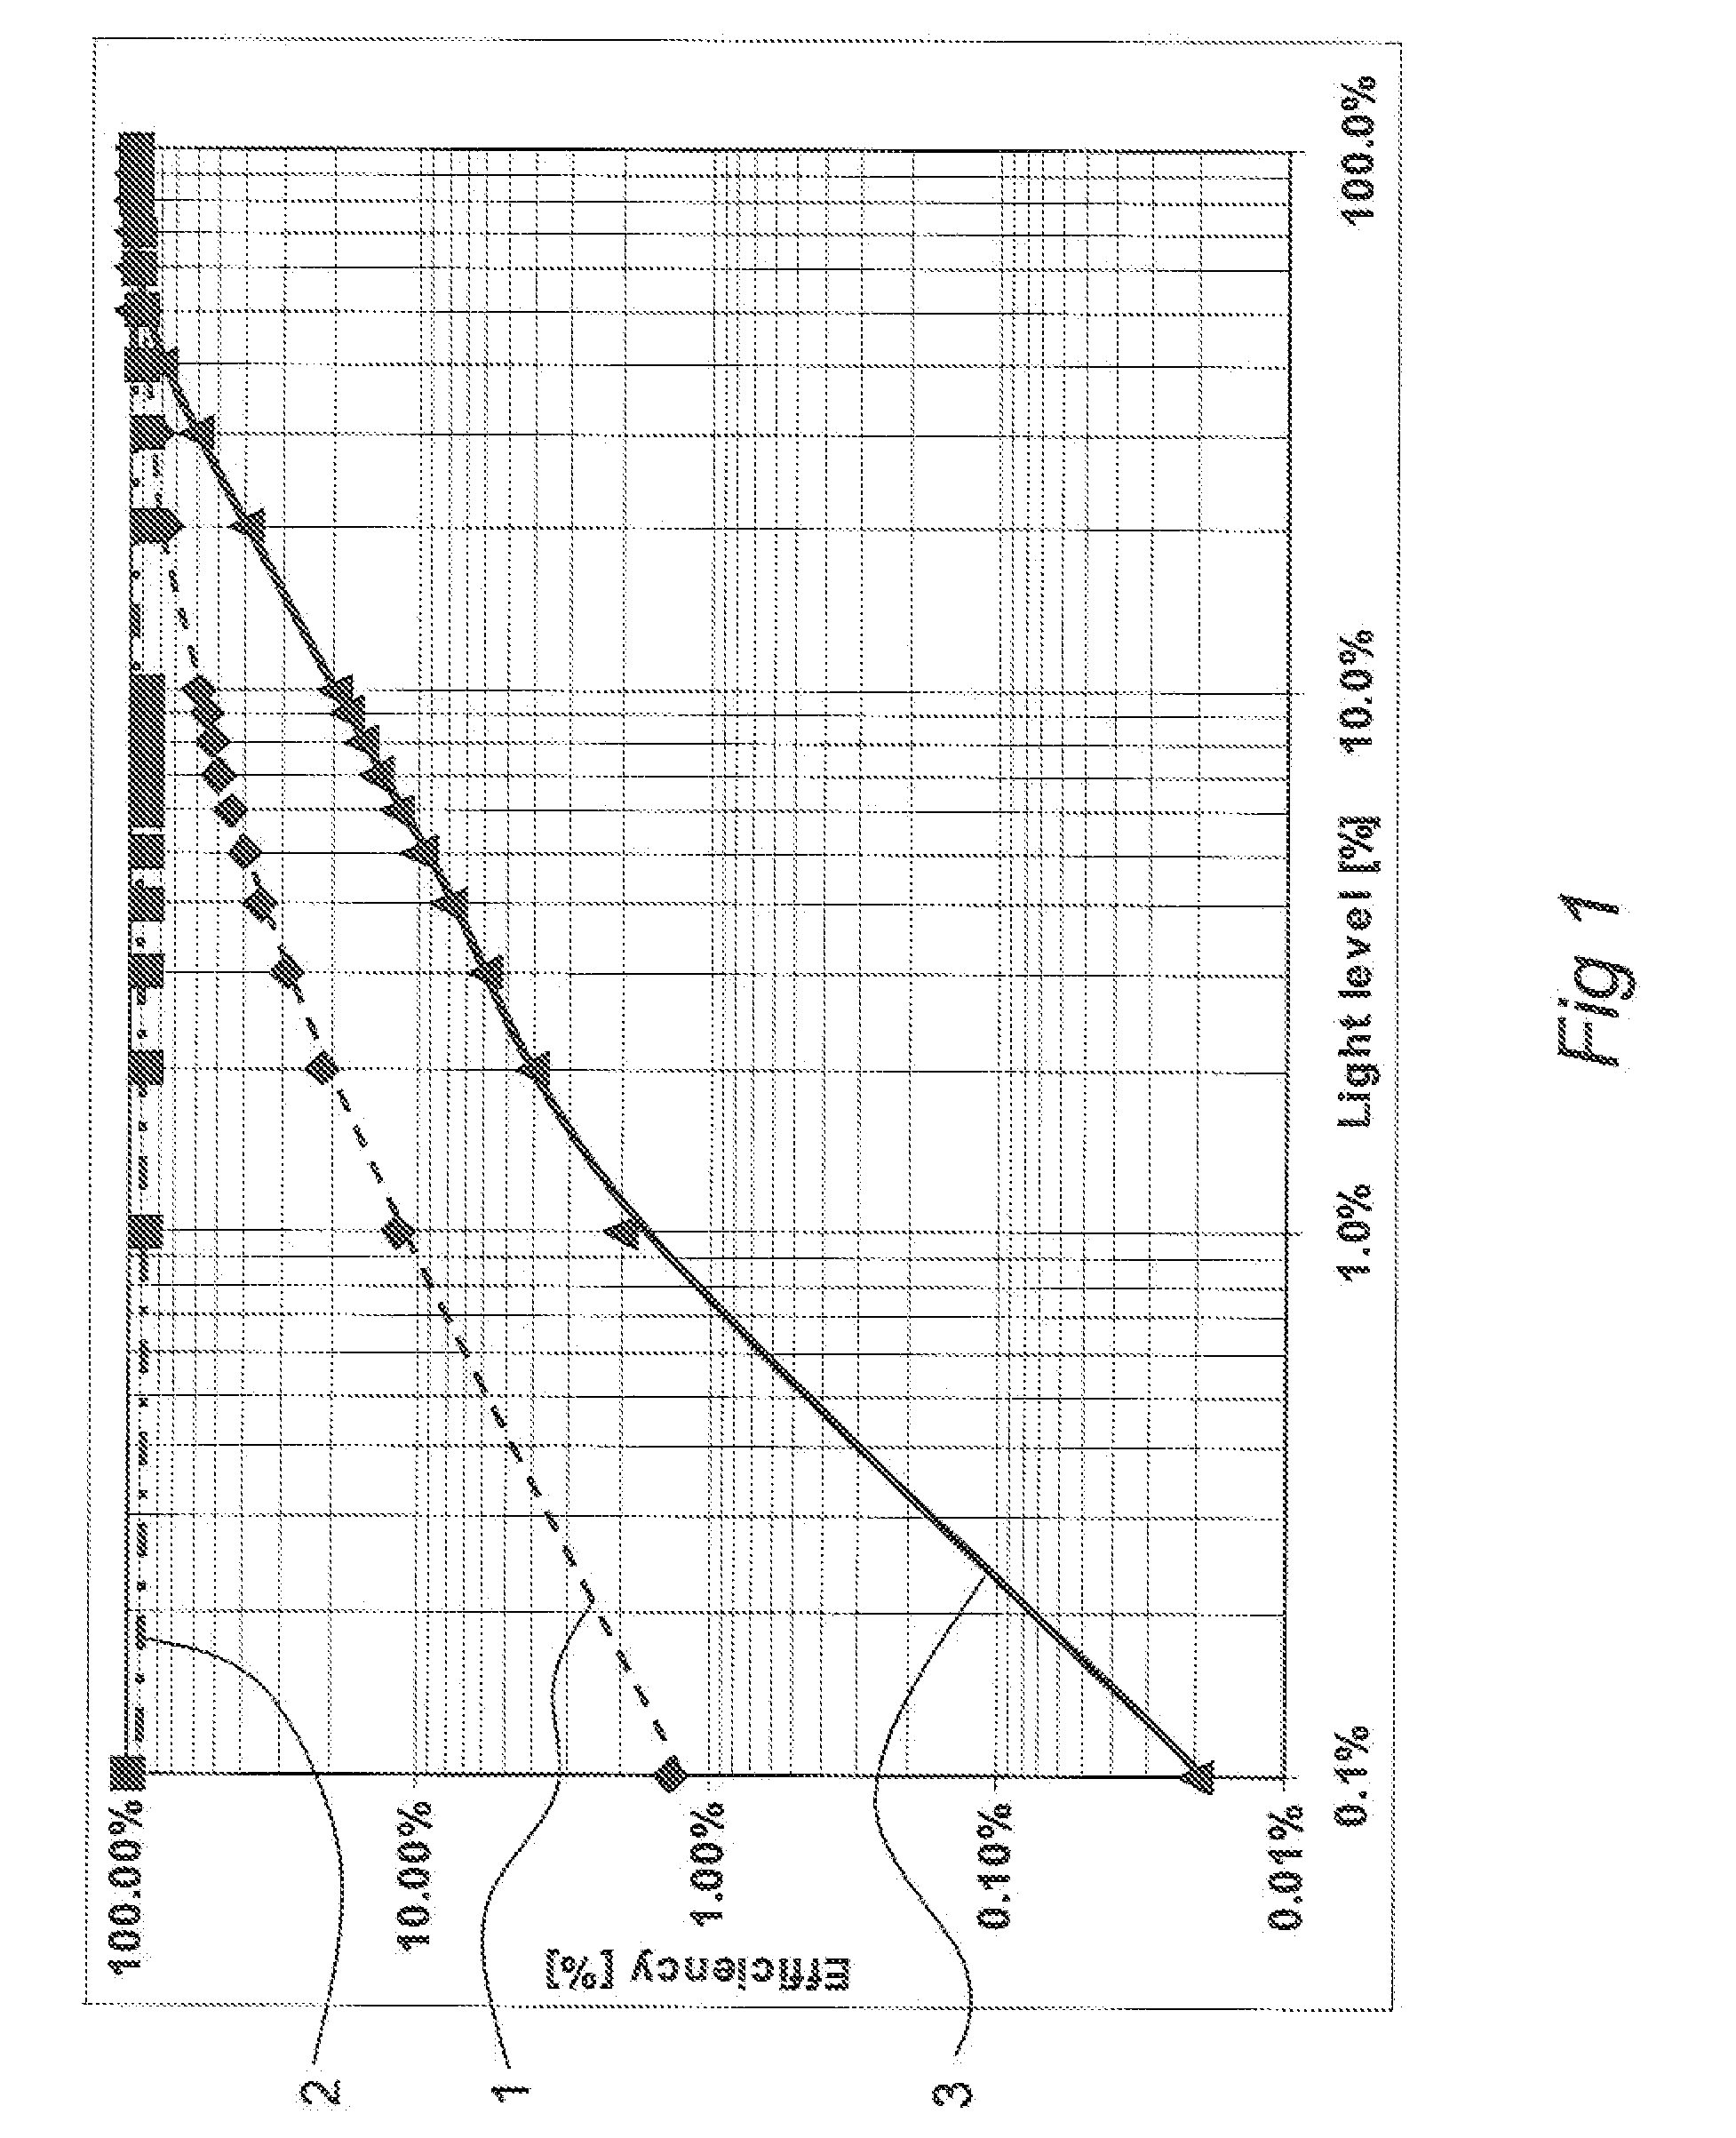 Switched mode power converter and method of operating the same